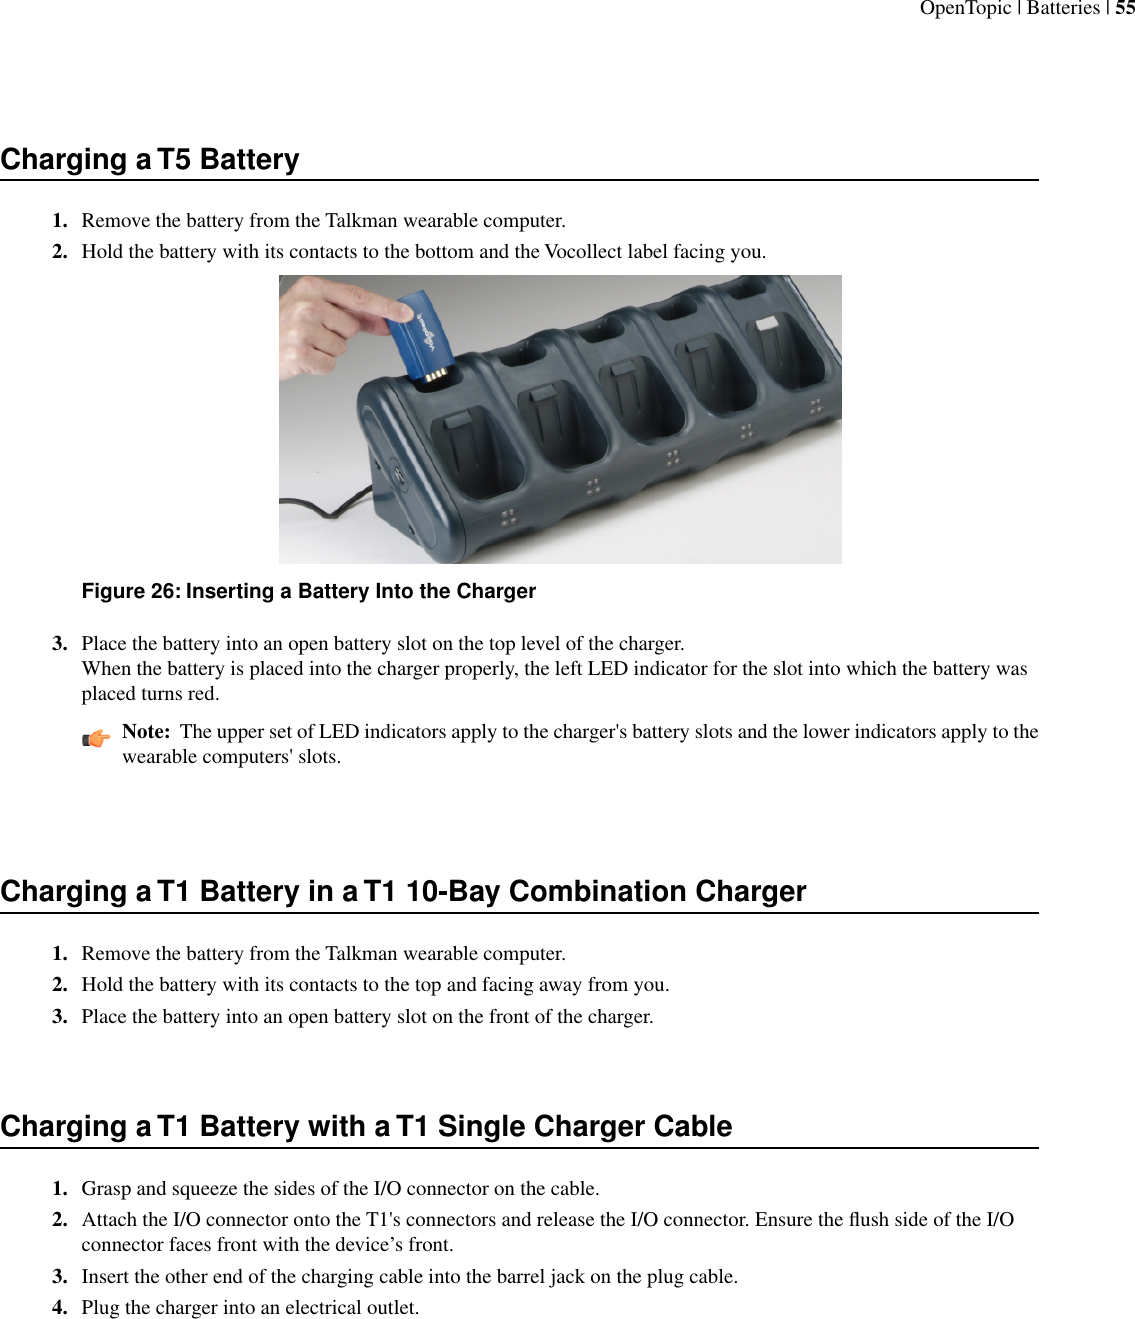 Charging a T5 Battery1. Remove the battery from the Talkman wearable computer.2. Hold the battery with its contacts to the bottom and the Vocollect label facing you.Figure 26: Inserting a Battery Into the Charger3. Place the battery into an open battery slot on the top level of the charger.When the battery is placed into the charger properly, the left LED indicator for the slot into which the battery wasplaced turns red.Note:  The upper set of LED indicators apply to the charger&apos;s battery slots and the lower indicators apply to thewearable computers&apos; slots.Charging a T1 Battery in a T1 10-Bay Combination Charger1. Remove the battery from the Talkman wearable computer.2. Hold the battery with its contacts to the top and facing away from you.3. Place the battery into an open battery slot on the front of the charger.Charging a T1 Battery with a T1 Single Charger Cable1. Grasp and squeeze the sides of the I/O connector on the cable.2. Attach the I/O connector onto the T1&apos;s connectors and release the I/O connector. Ensure the ﬂush side of the I/Oconnector faces front with the device’s front.3. Insert the other end of the charging cable into the barrel jack on the plug cable.4. Plug the charger into an electrical outlet.OpenTopic | Batteries | 55